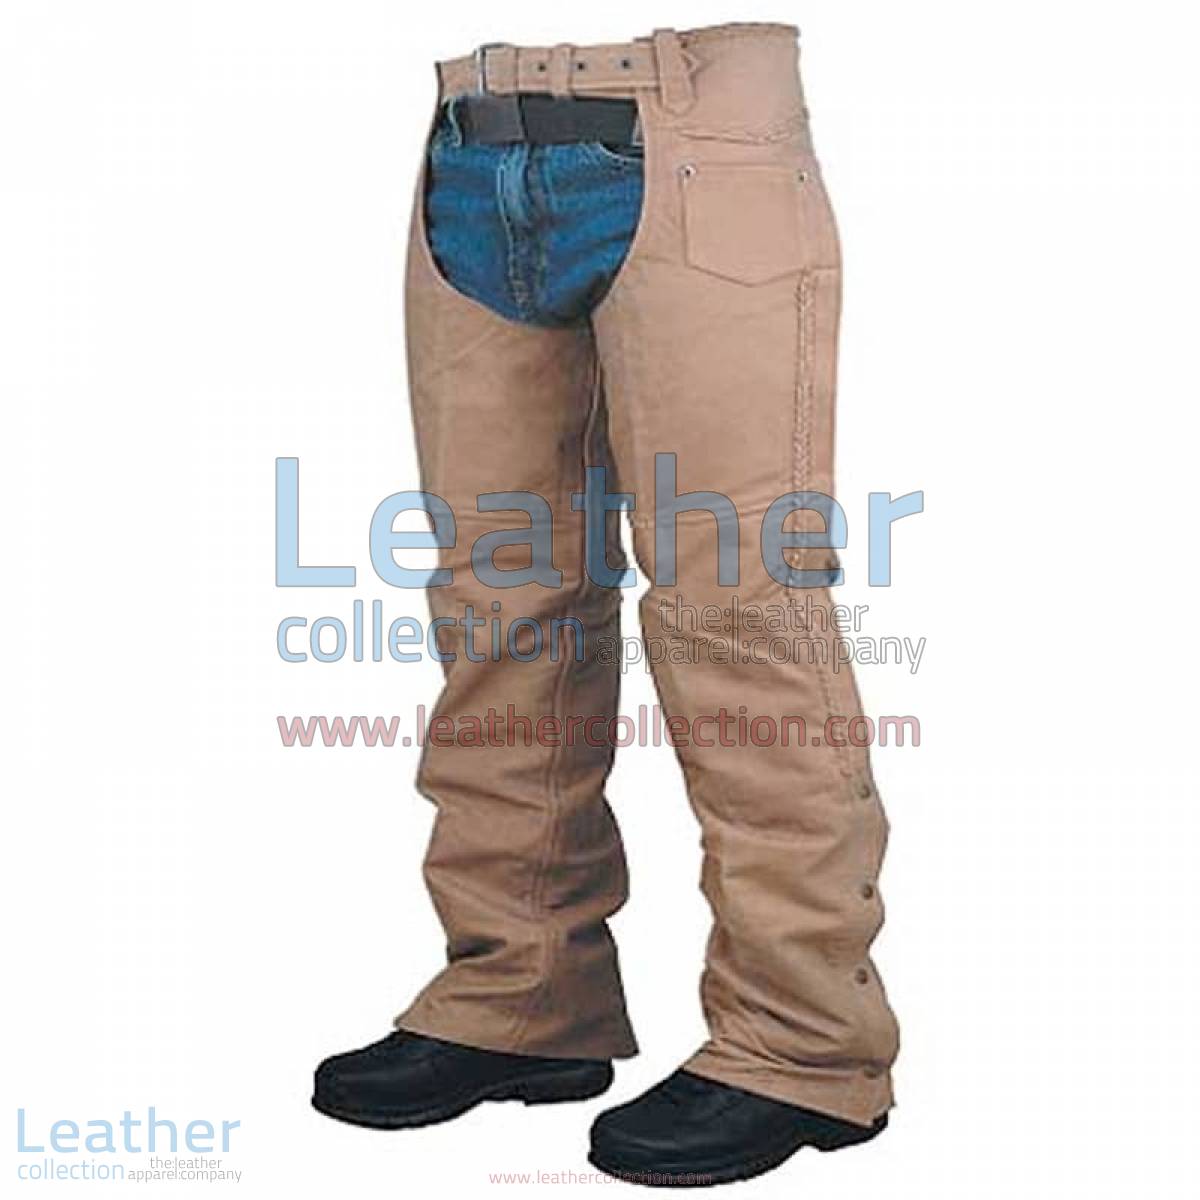 Leather Braided Chaps For Men | leather chaps for men